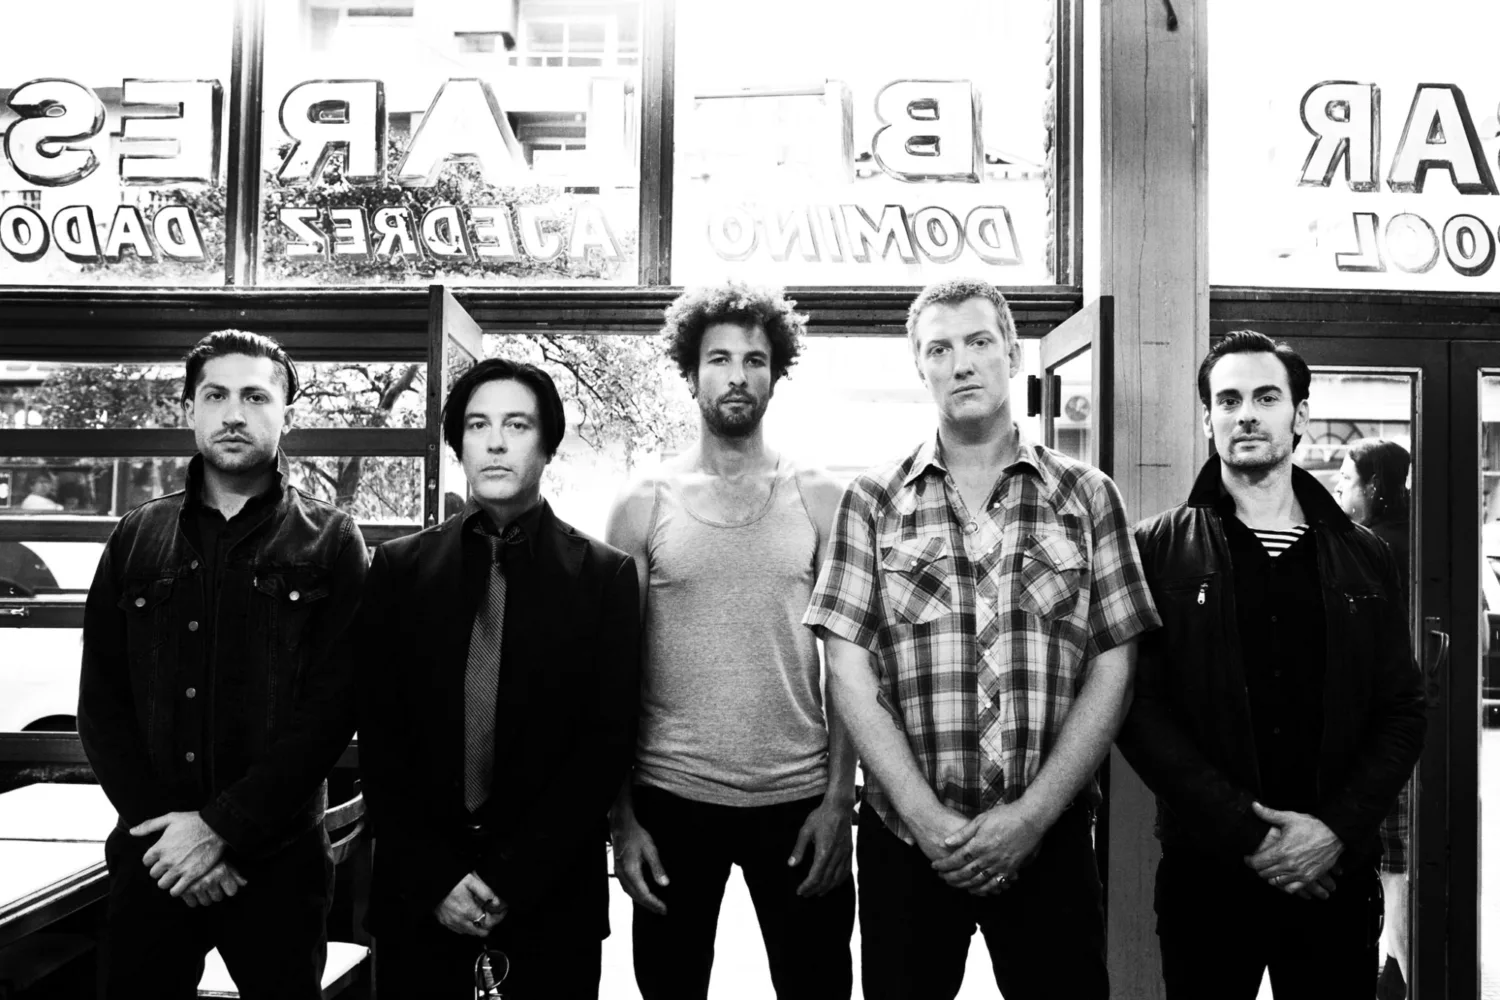 So, it looks like that new Queens of the Stone Age album is finished